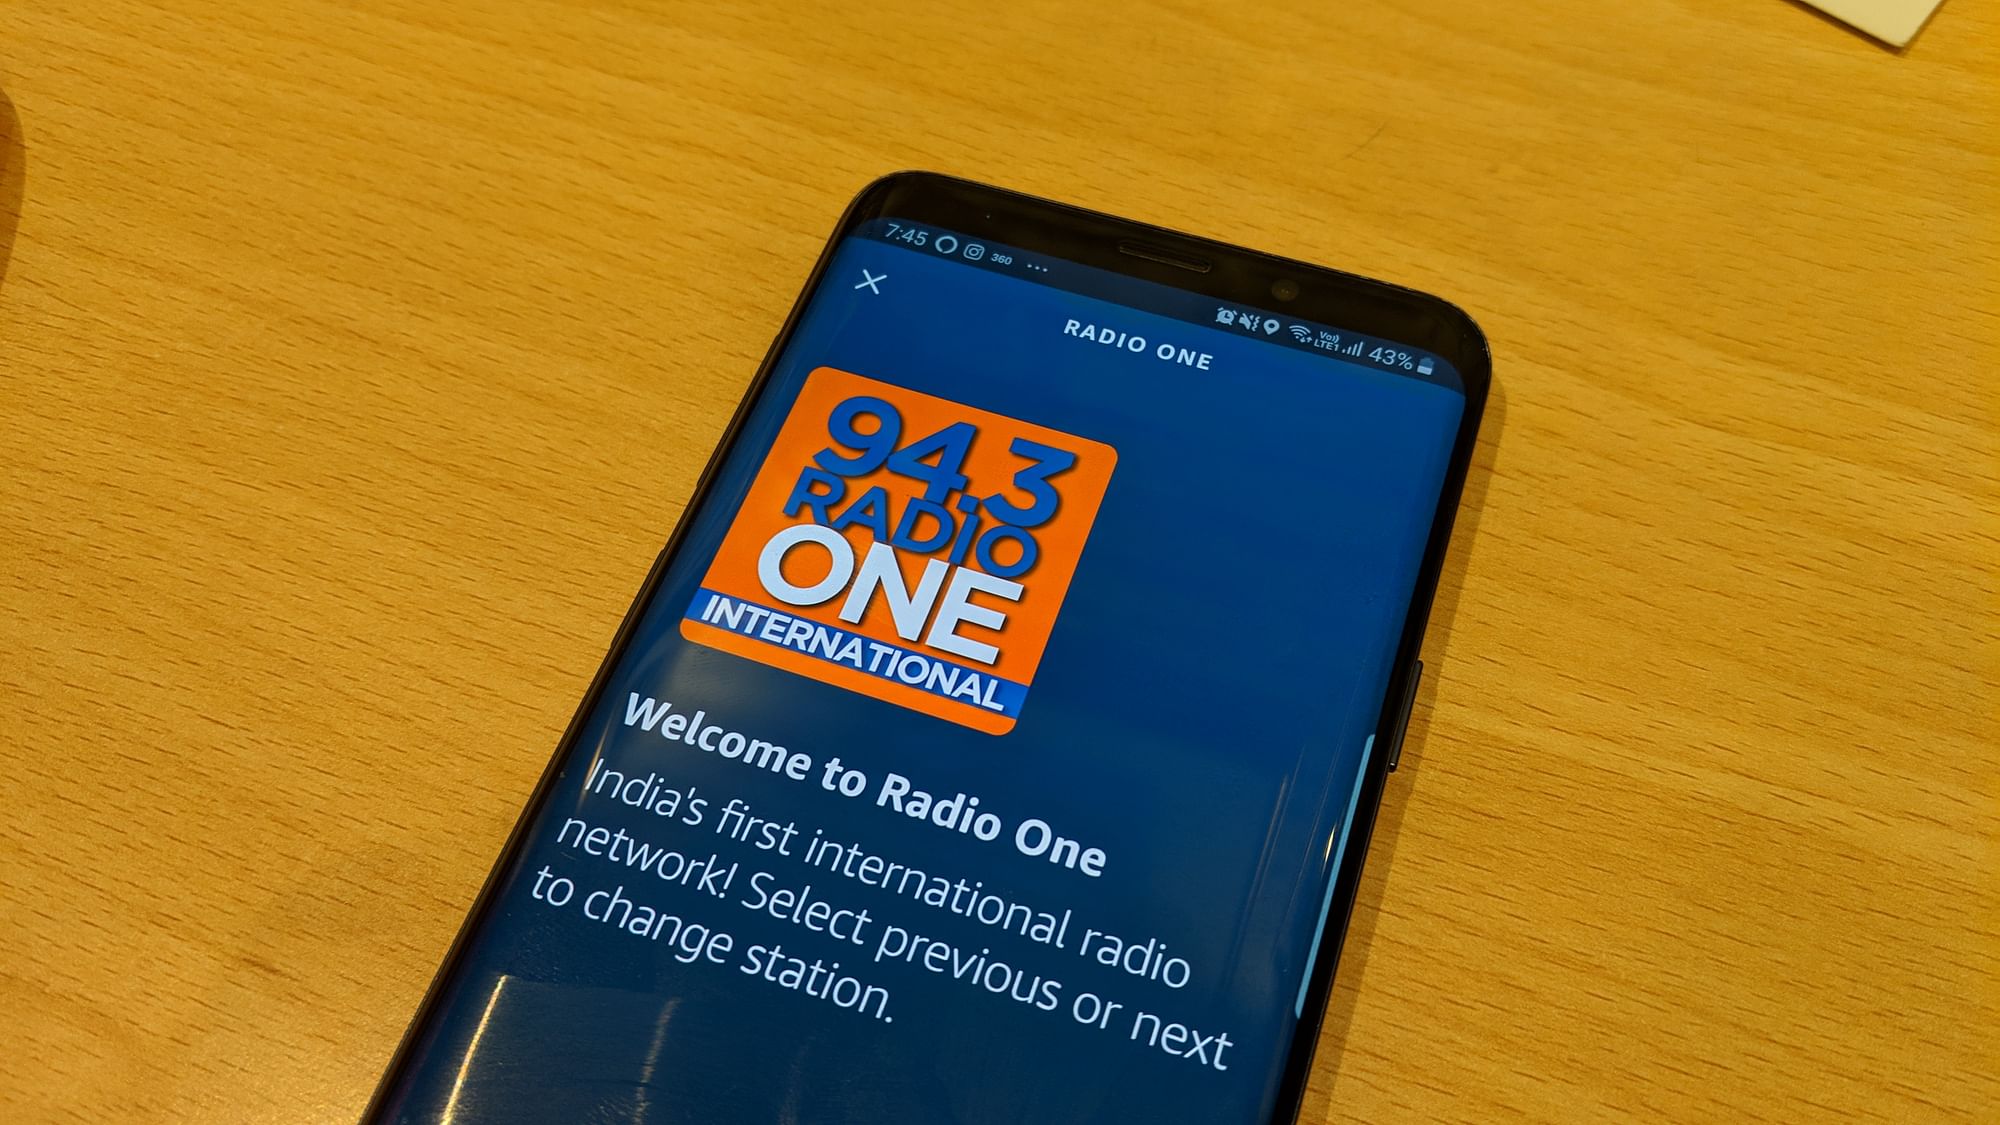 Radio One is one of the many channels you can play via Alexa.